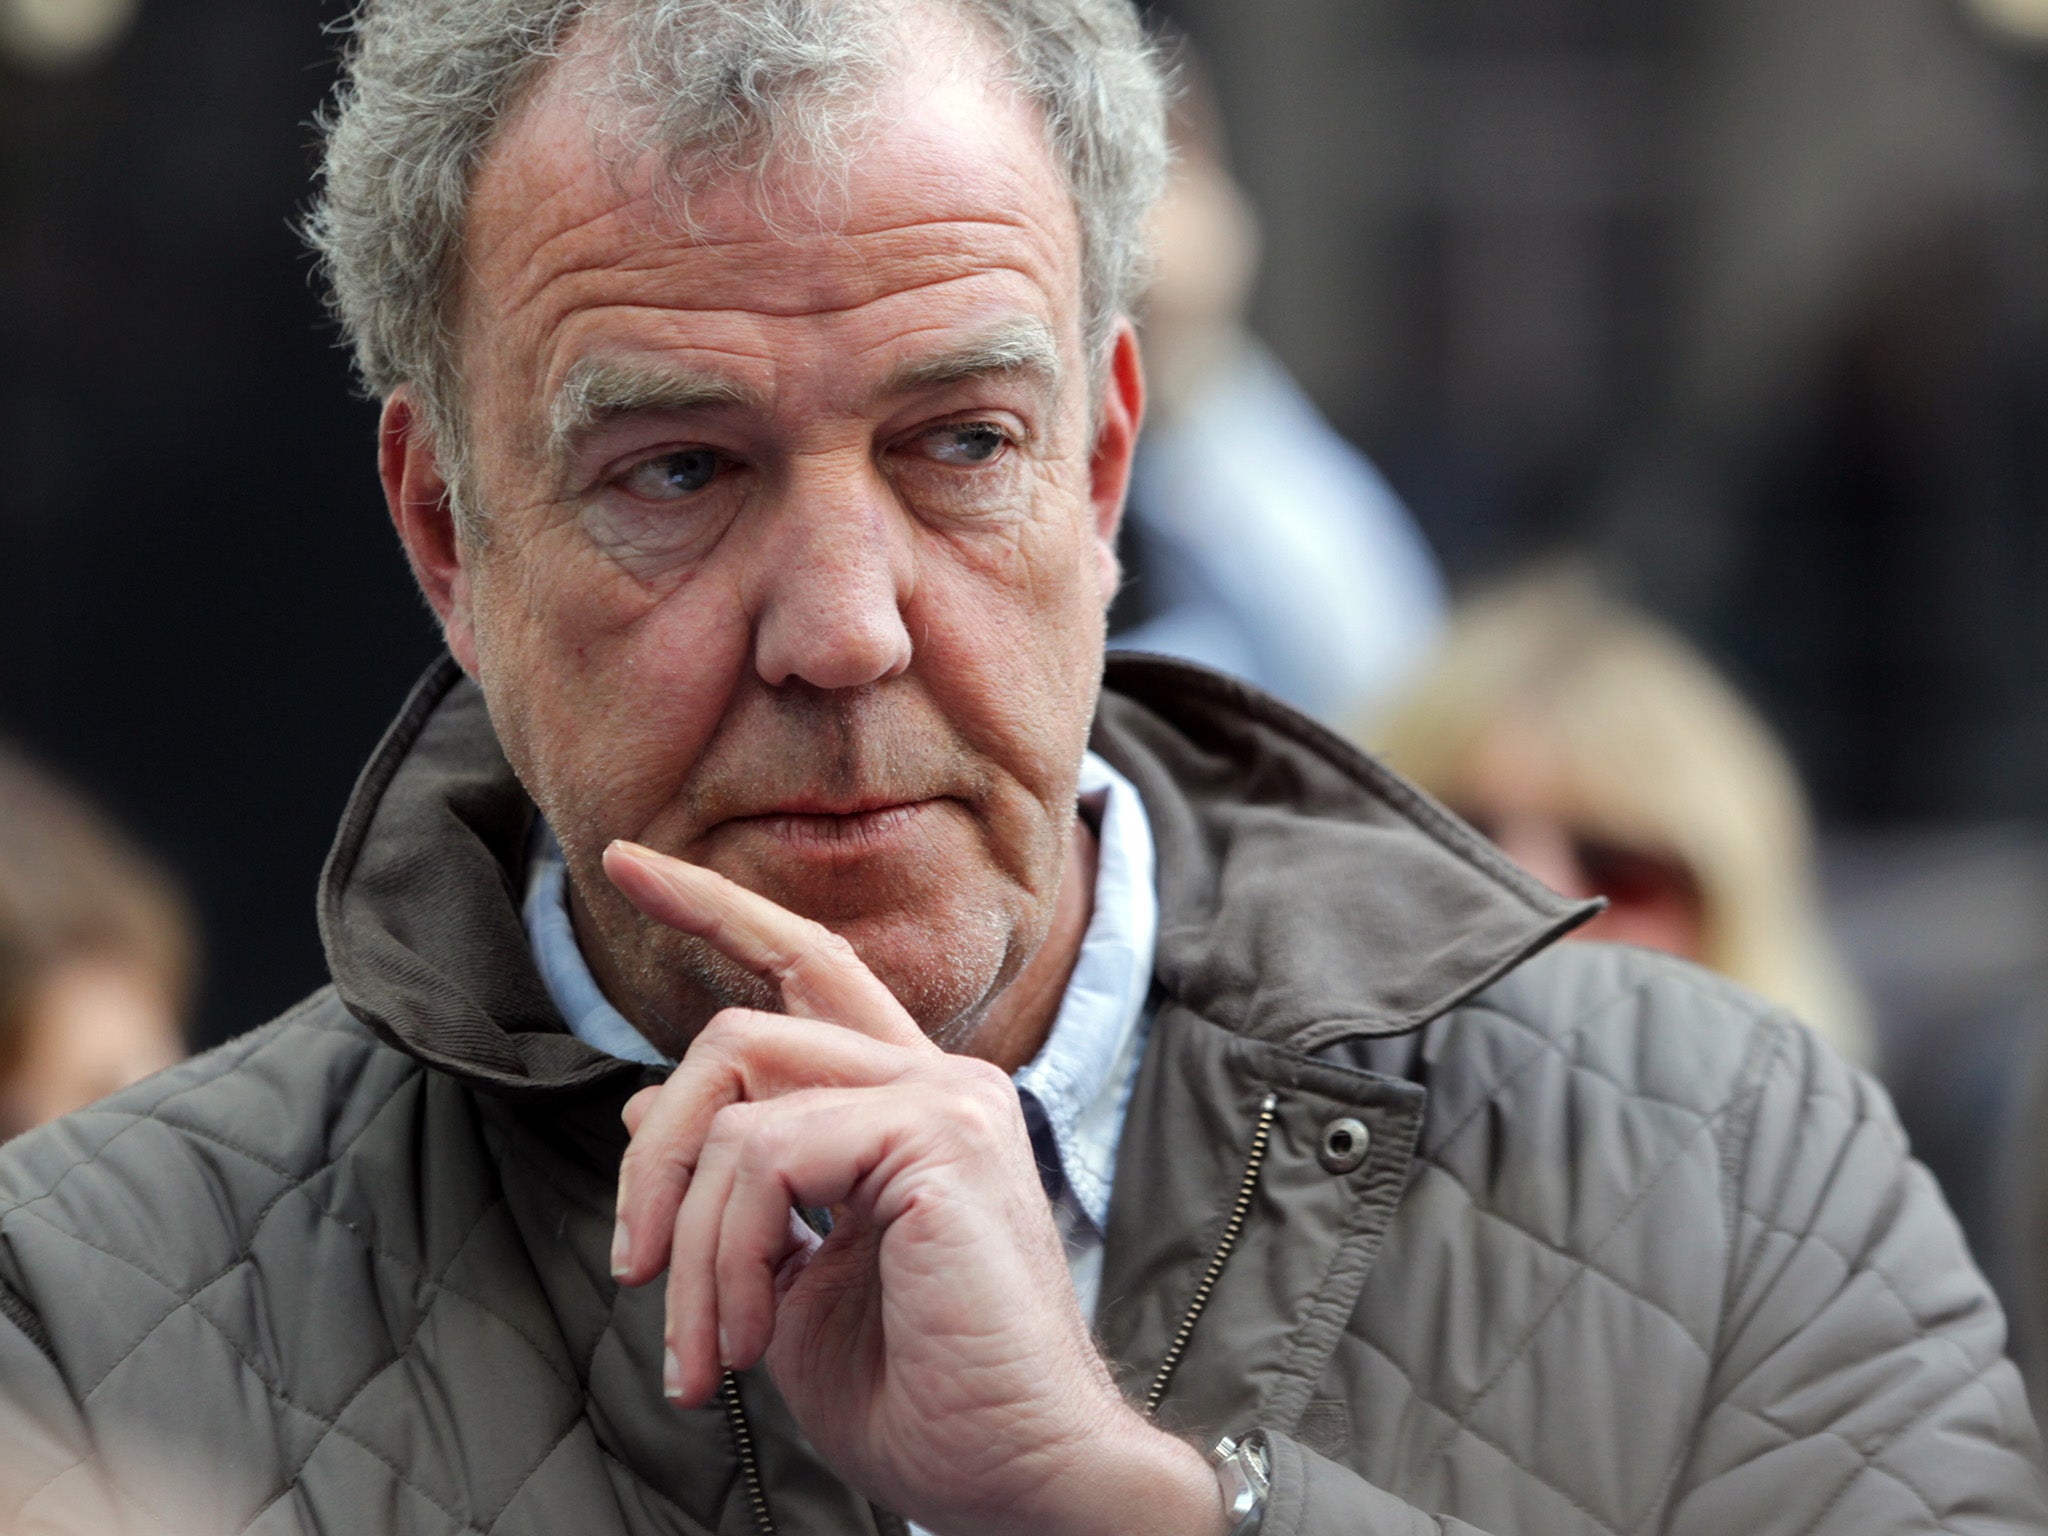 Jeremy Clarkson was interviewed by Chris Evans on Radio 1 and will be appearing on TFI Friday